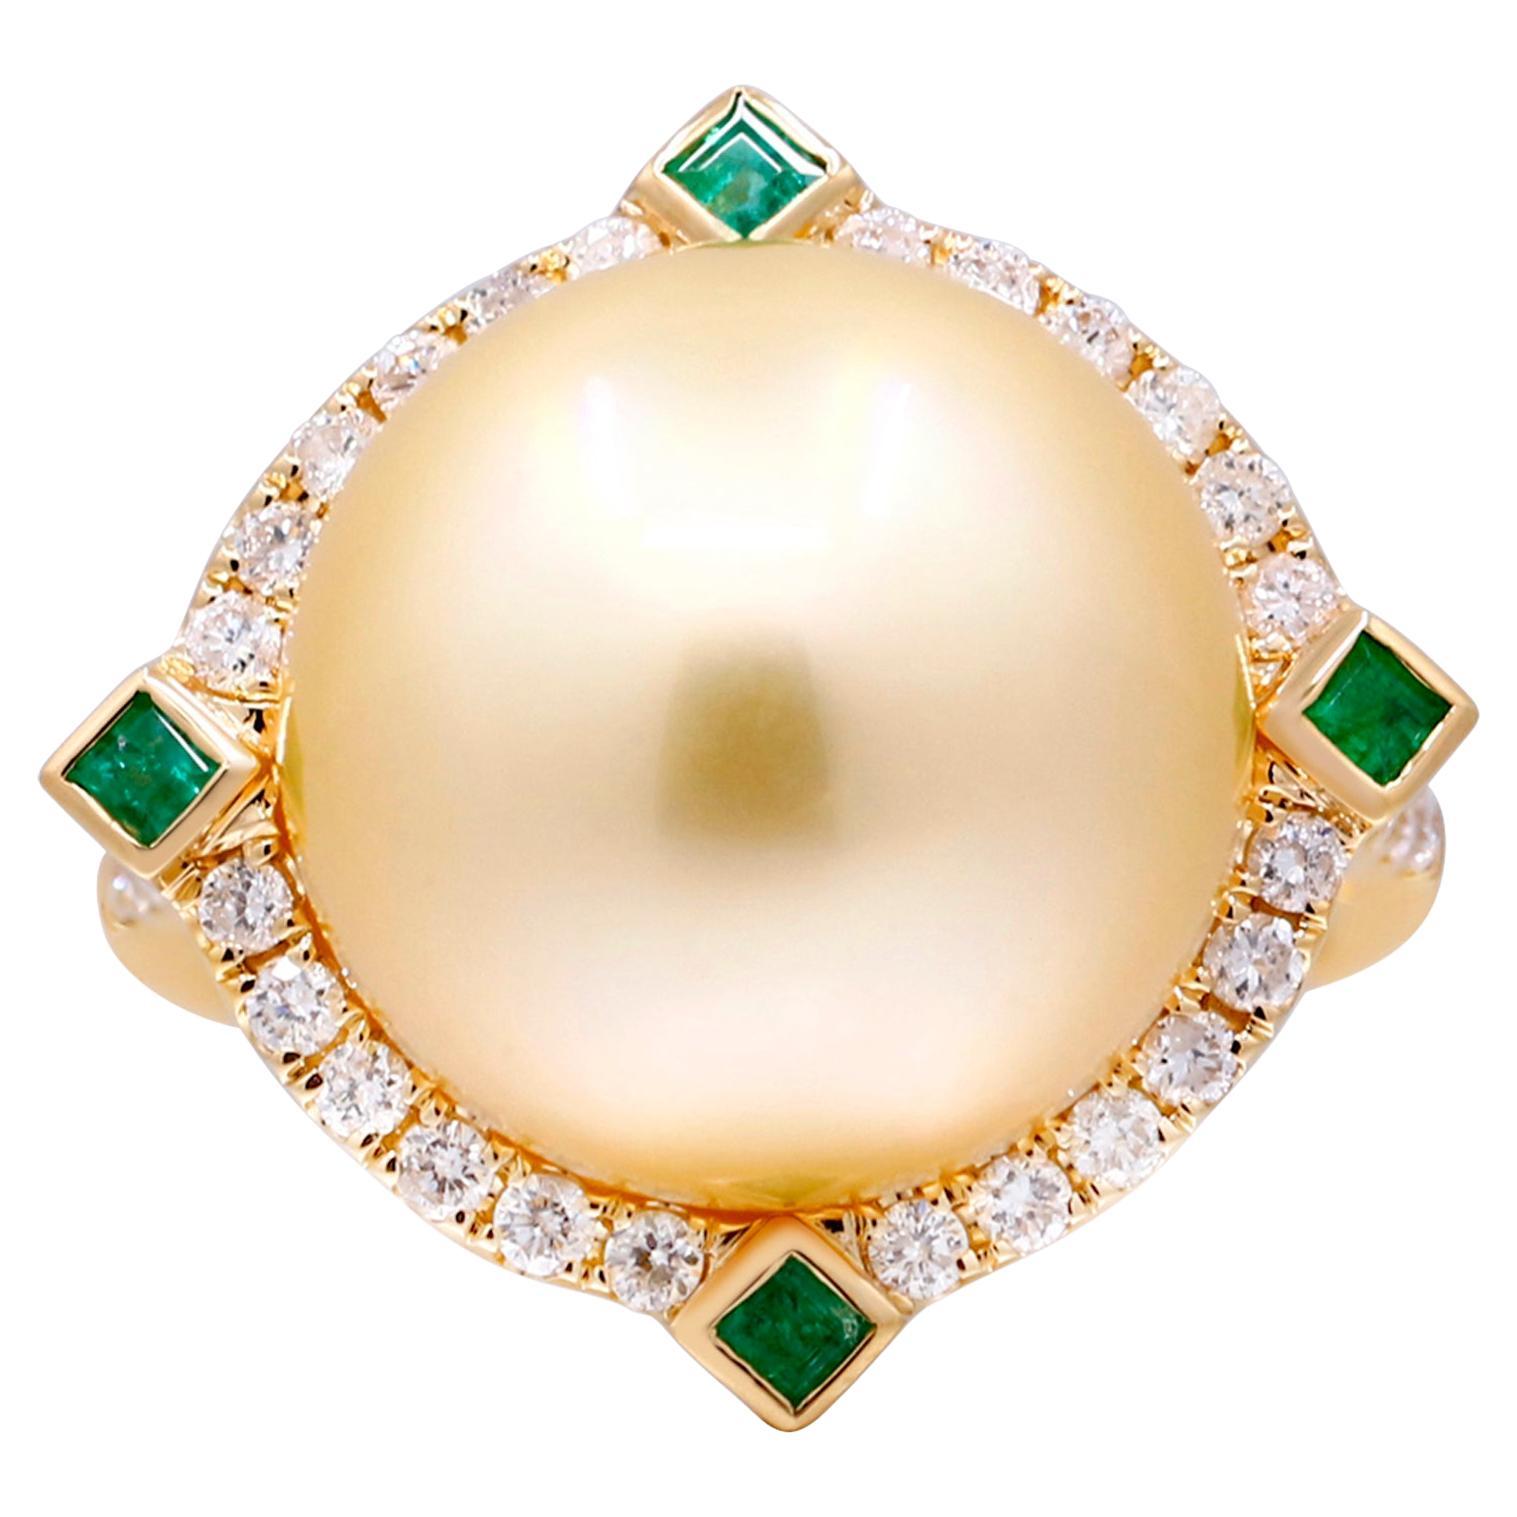 South Sea Pearl, Emerald with Diamond Accents 18K Yellow Gold Ring